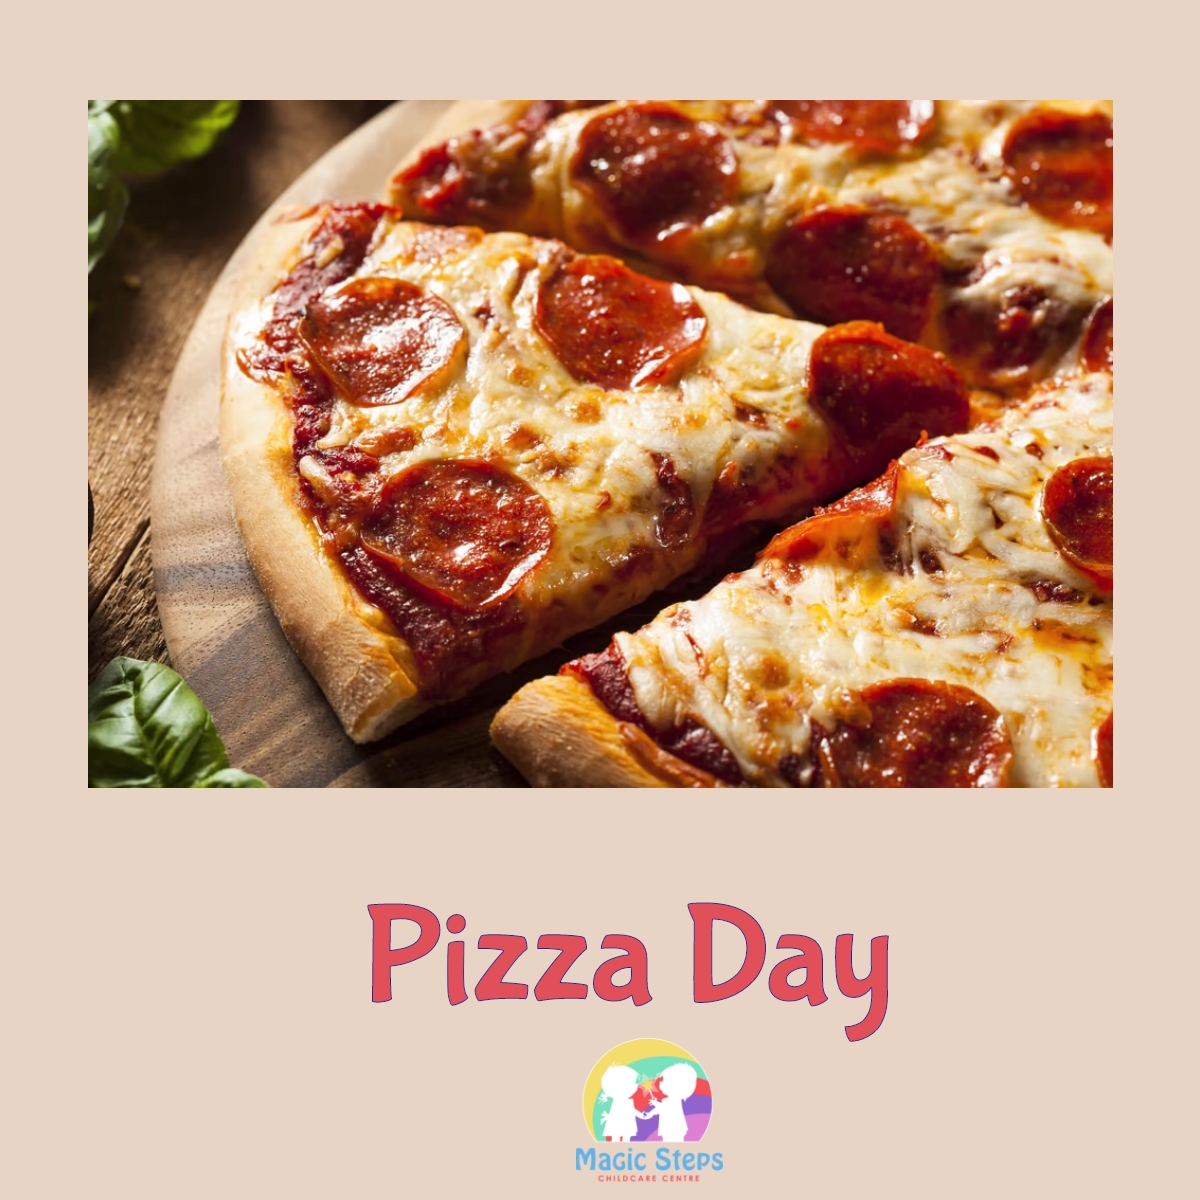 Pizza Day- Tuesday 10th May